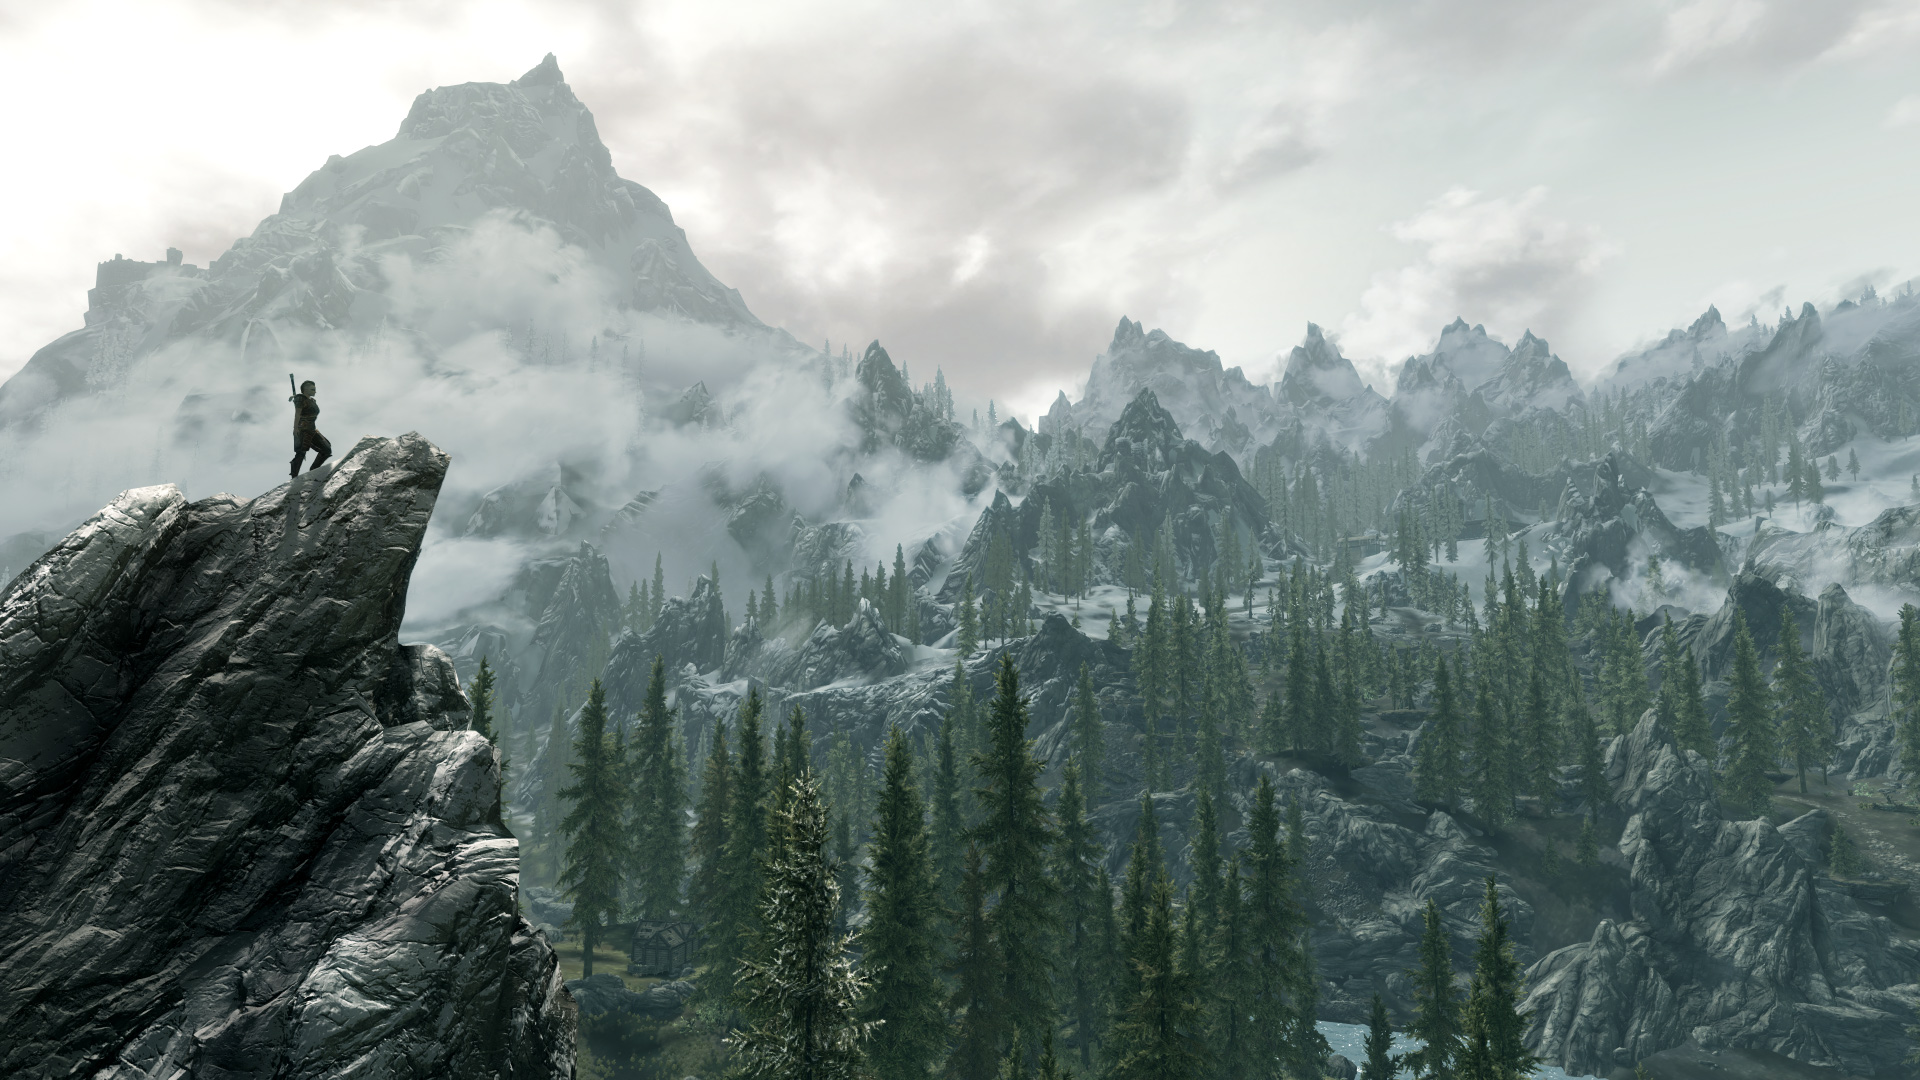 Skyrim Wallpaper 1080p Peasant Miscers With Small Screens Stay Out